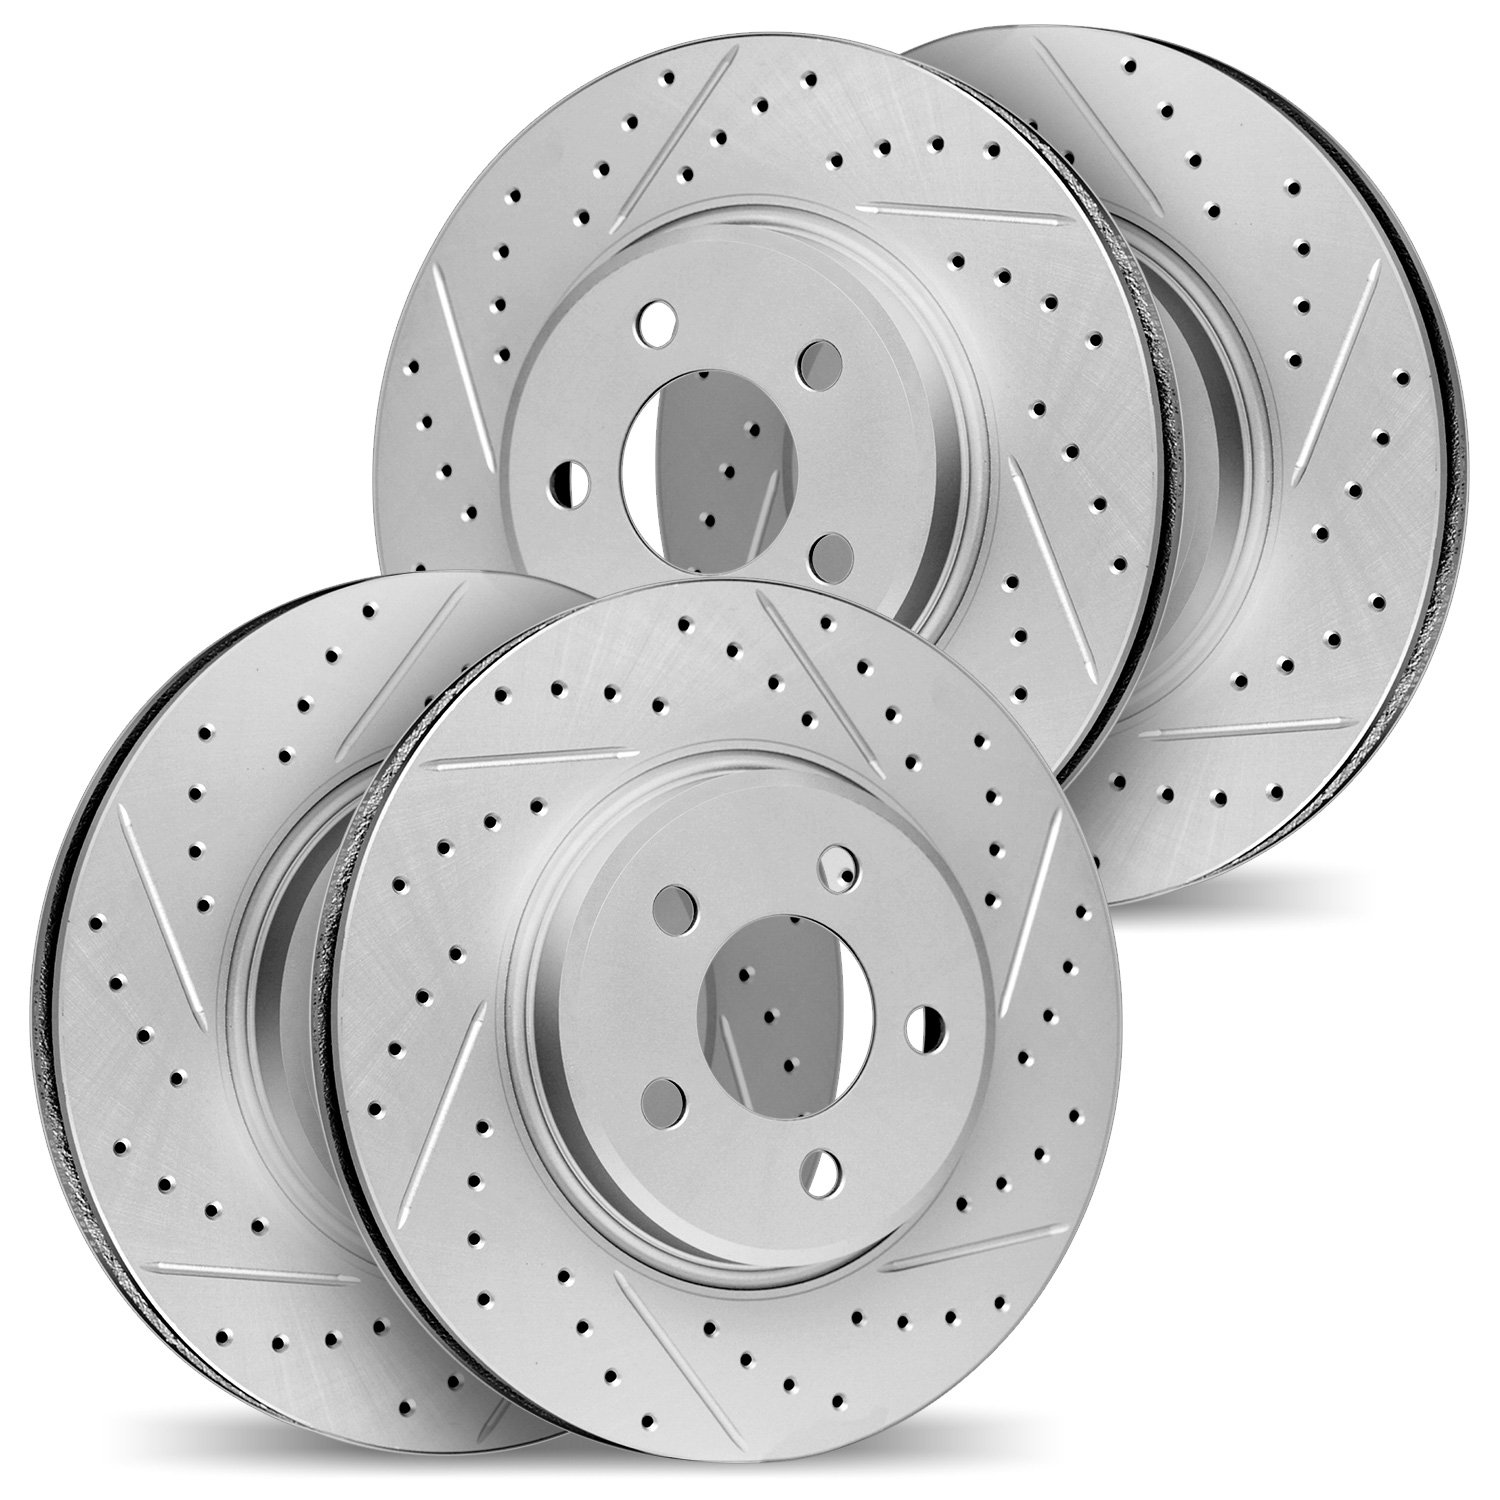 2004-31079 Geoperformance Drilled/Slotted Brake Rotors, 2000-2003 BMW, Position: Front and Rear